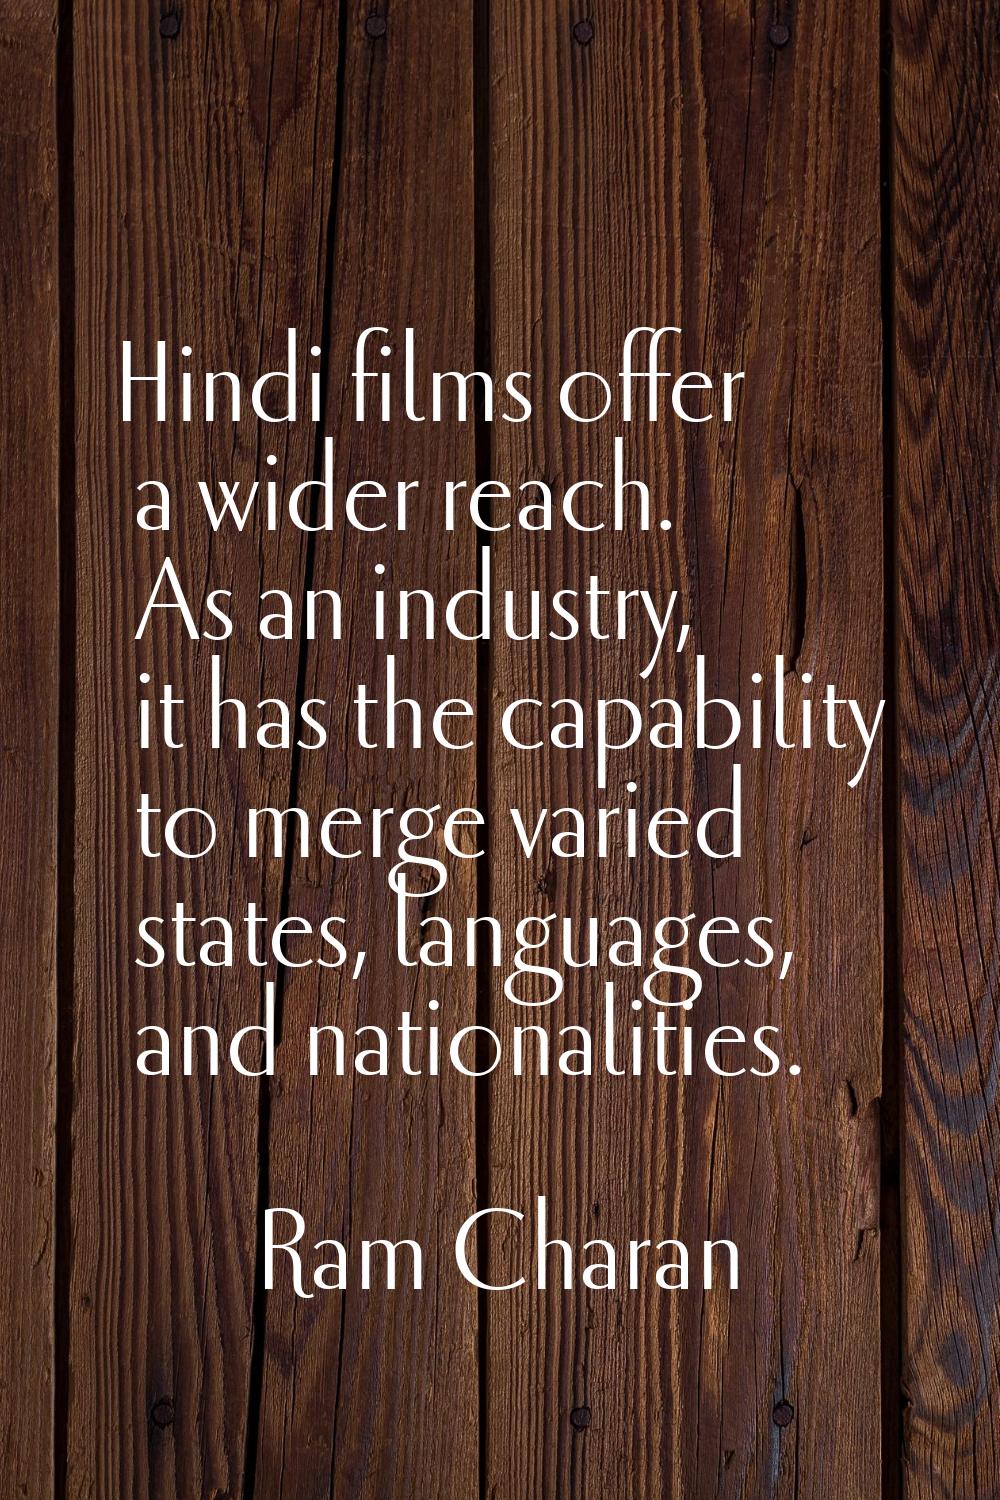 Hindi films offer a wider reach. As an industry, it has the capability to merge varied states, lang